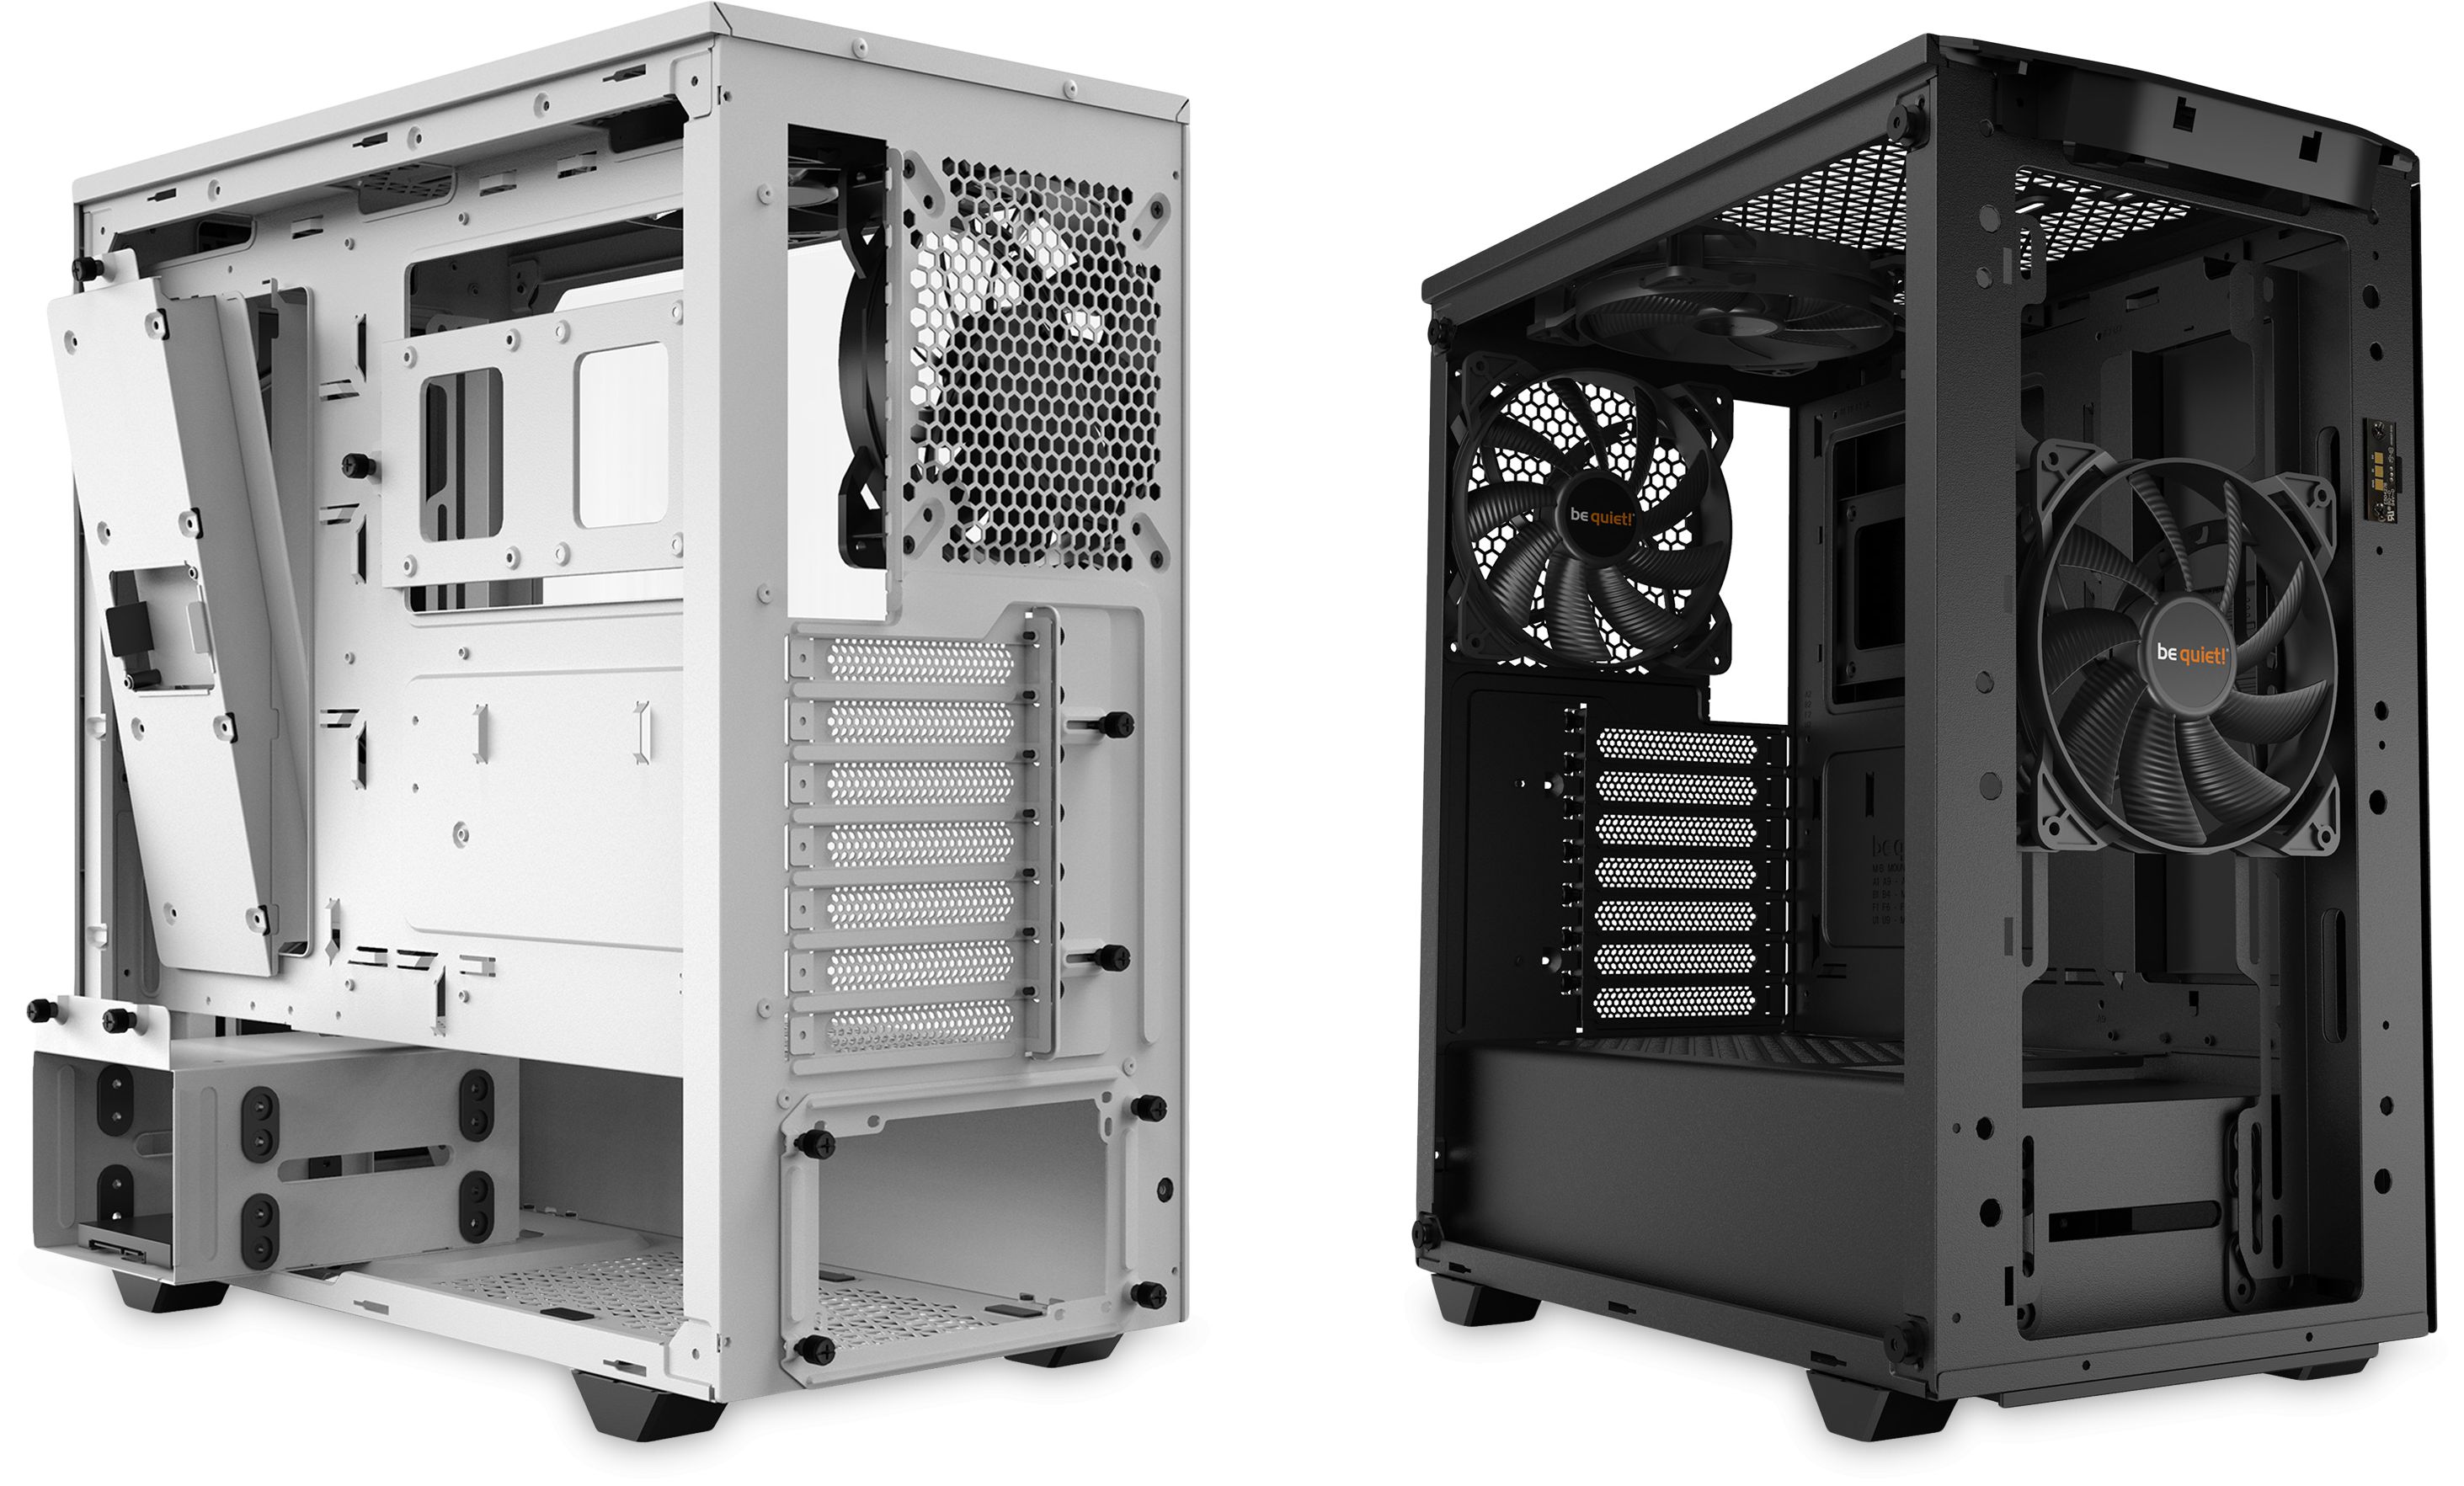 be quiet! Pure Base 500DX mid-tower PC case is now just $84